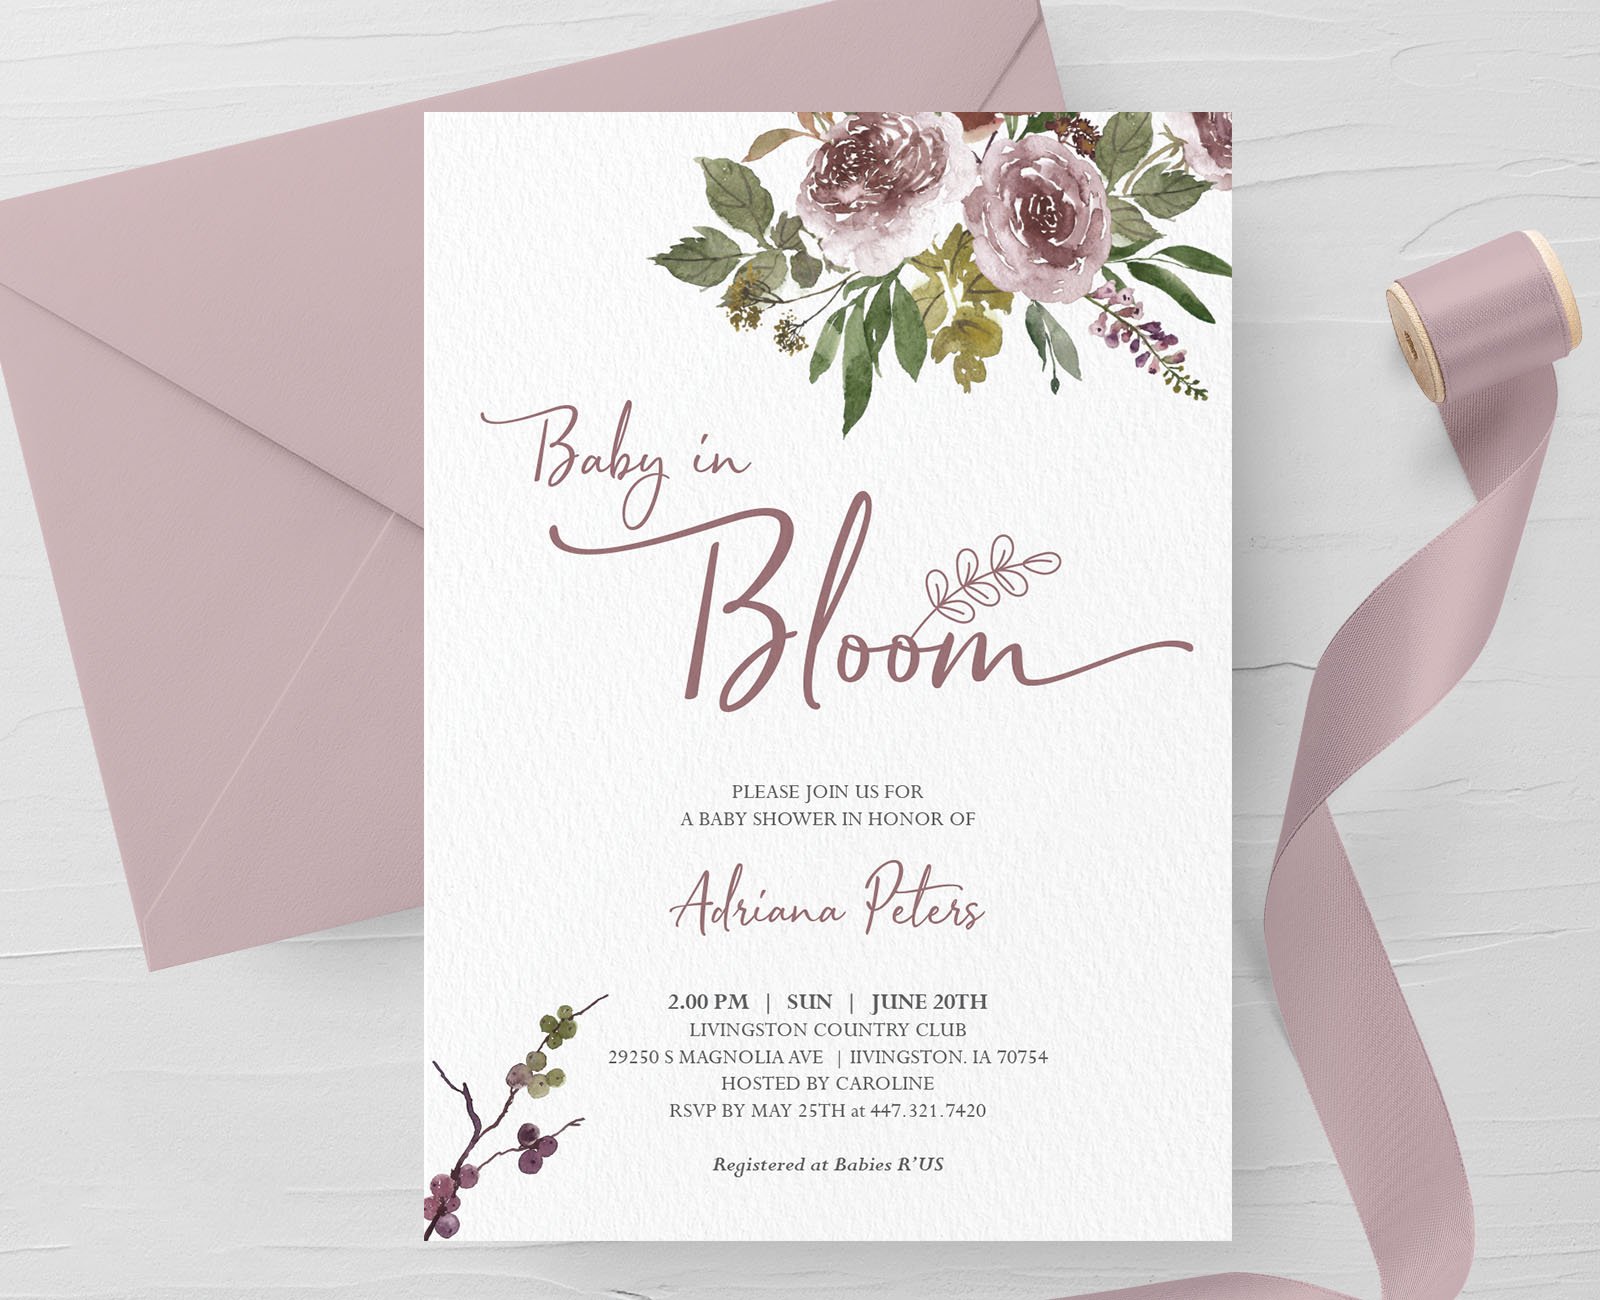 Blush Pink Gold Glitter Baby Shower Blank Invitations with